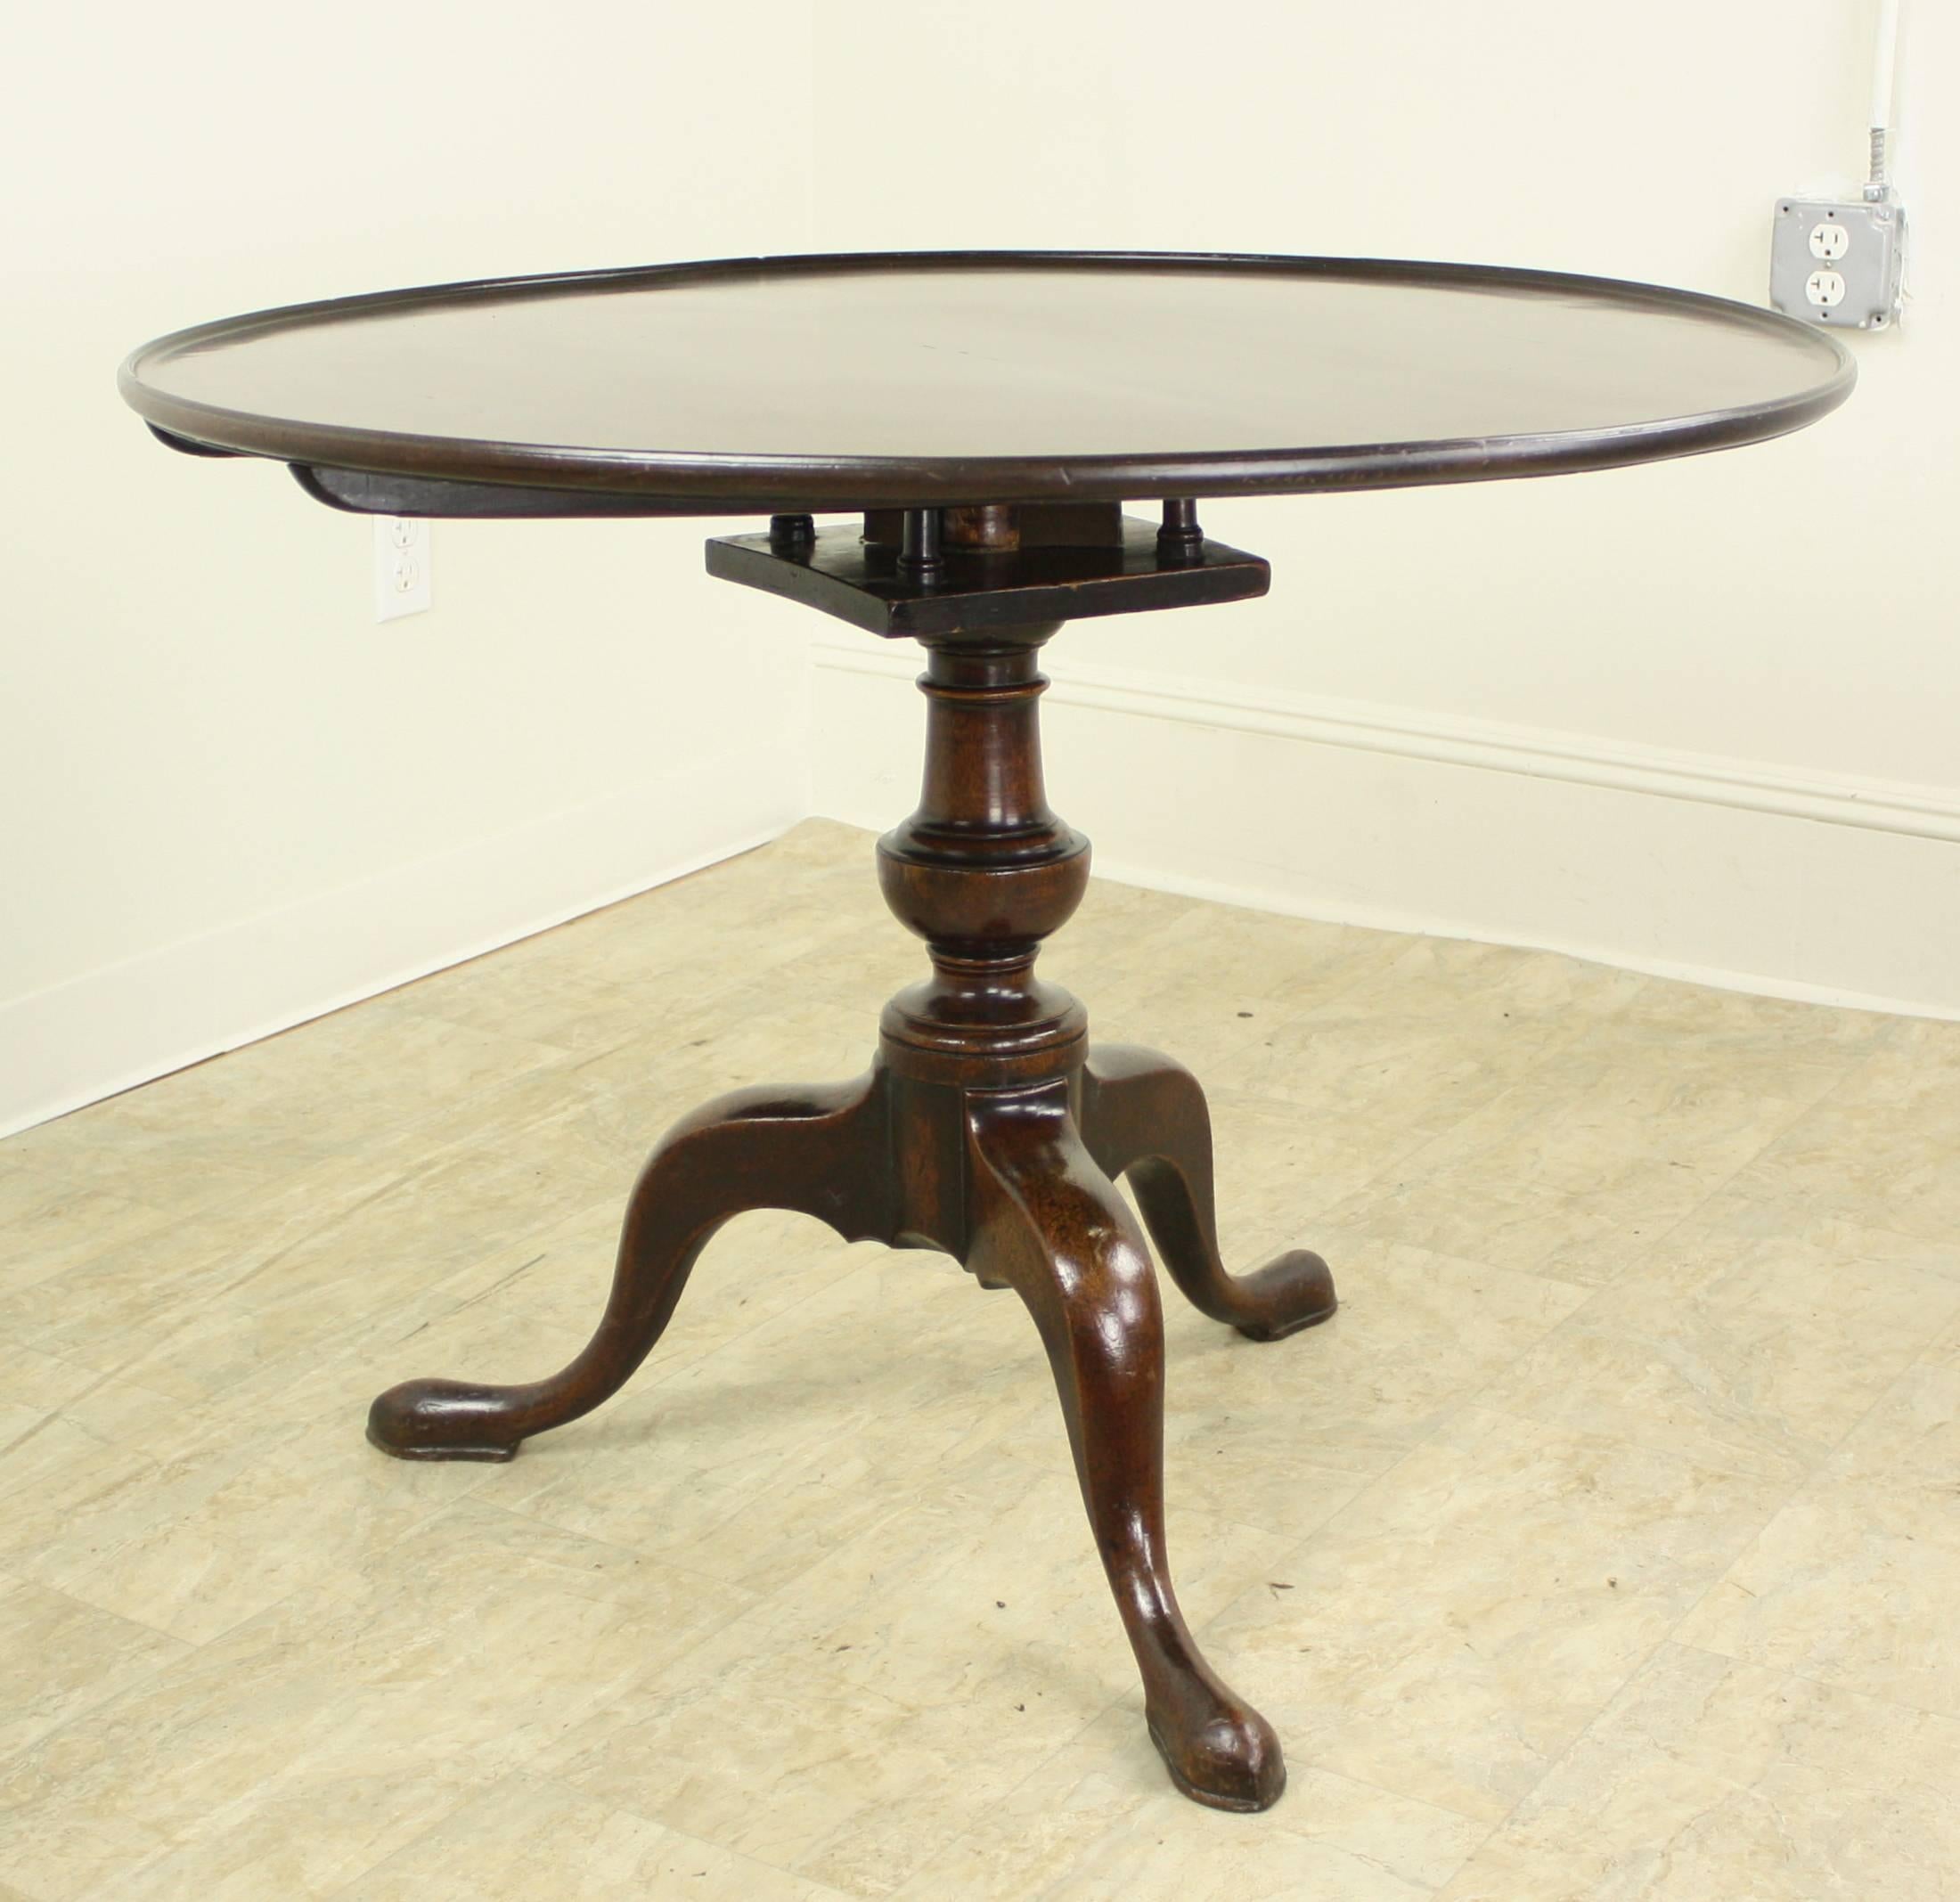 A fine Georgian tilt-top table, with a reeded dish top resting on a birdcage base. The lovely baluster-form pedestal, complete with vase turned shaft, ends with graceful cabriole legs and pad feet. Slide button mechanism insures a secure fit in the